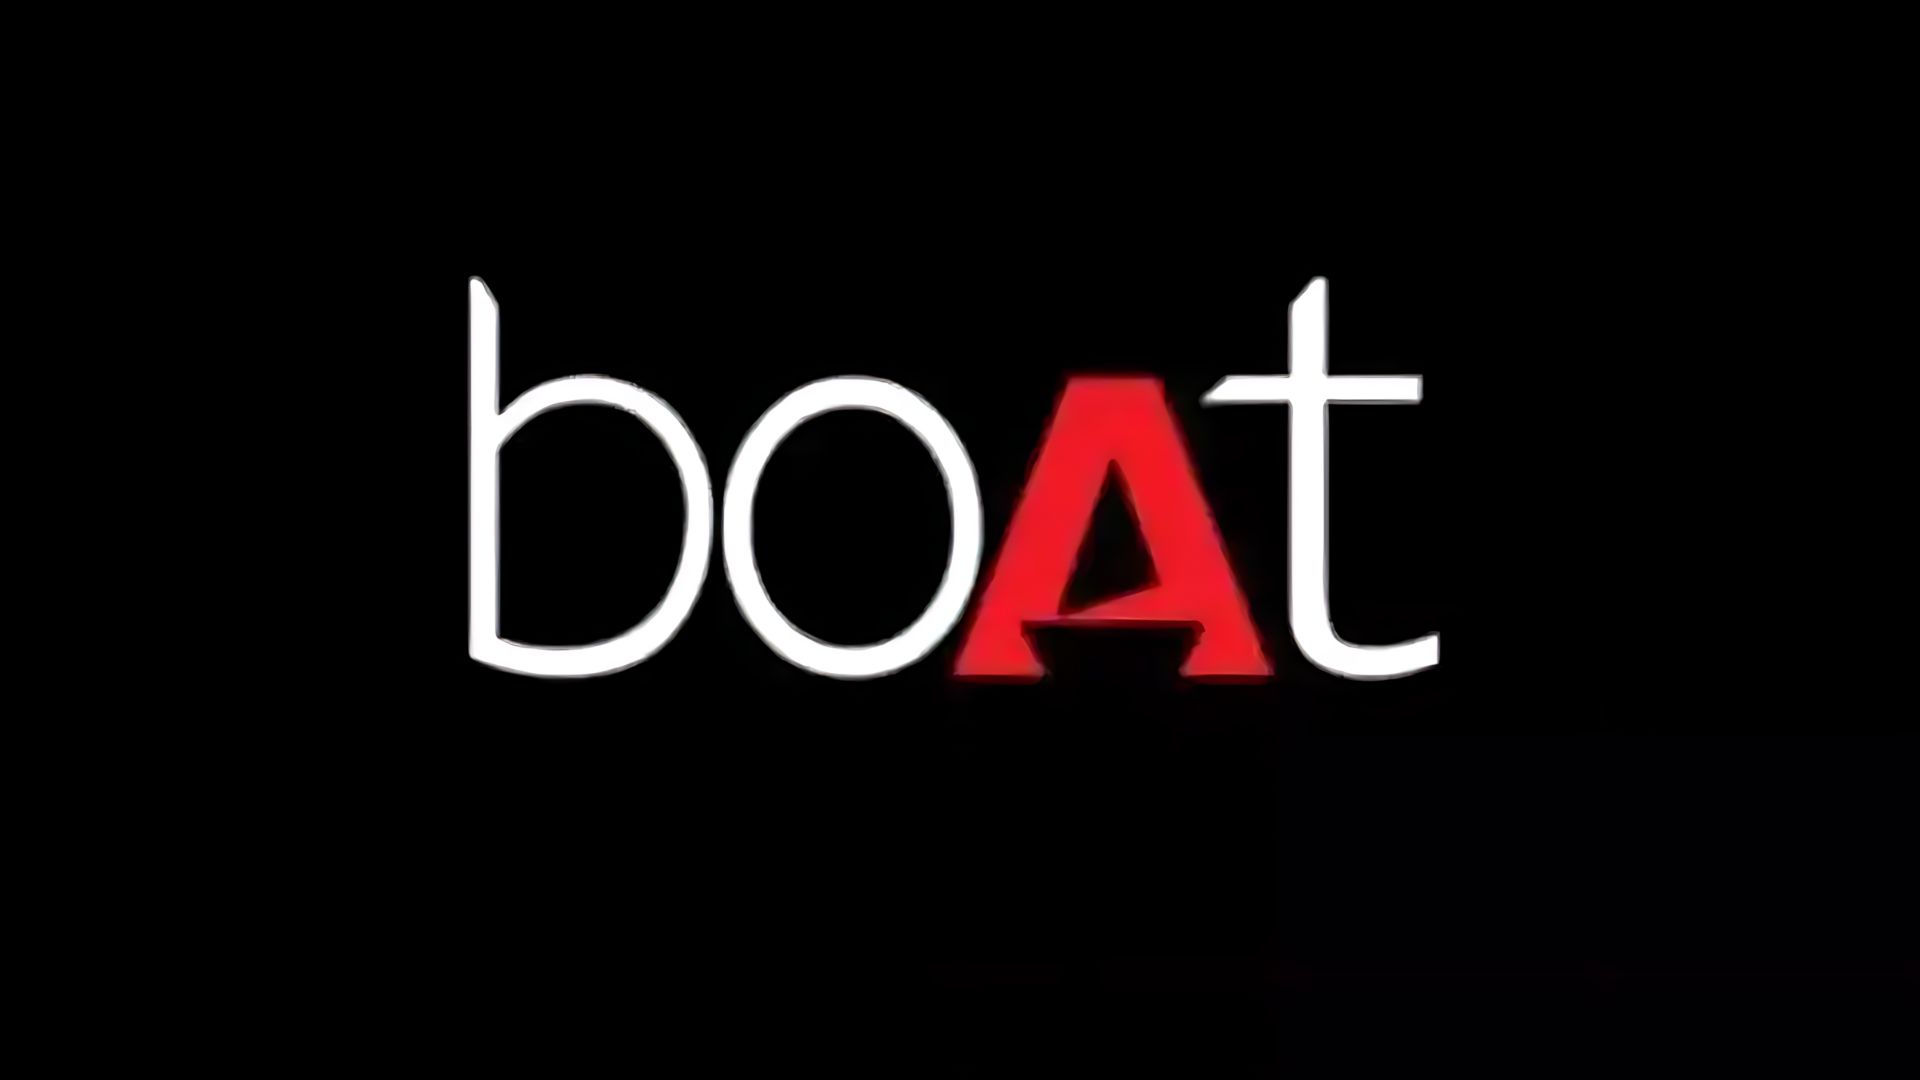 Over 7.5 Million boAt Users’ Personal Data Exposed in Data Breach – Are You Affected?